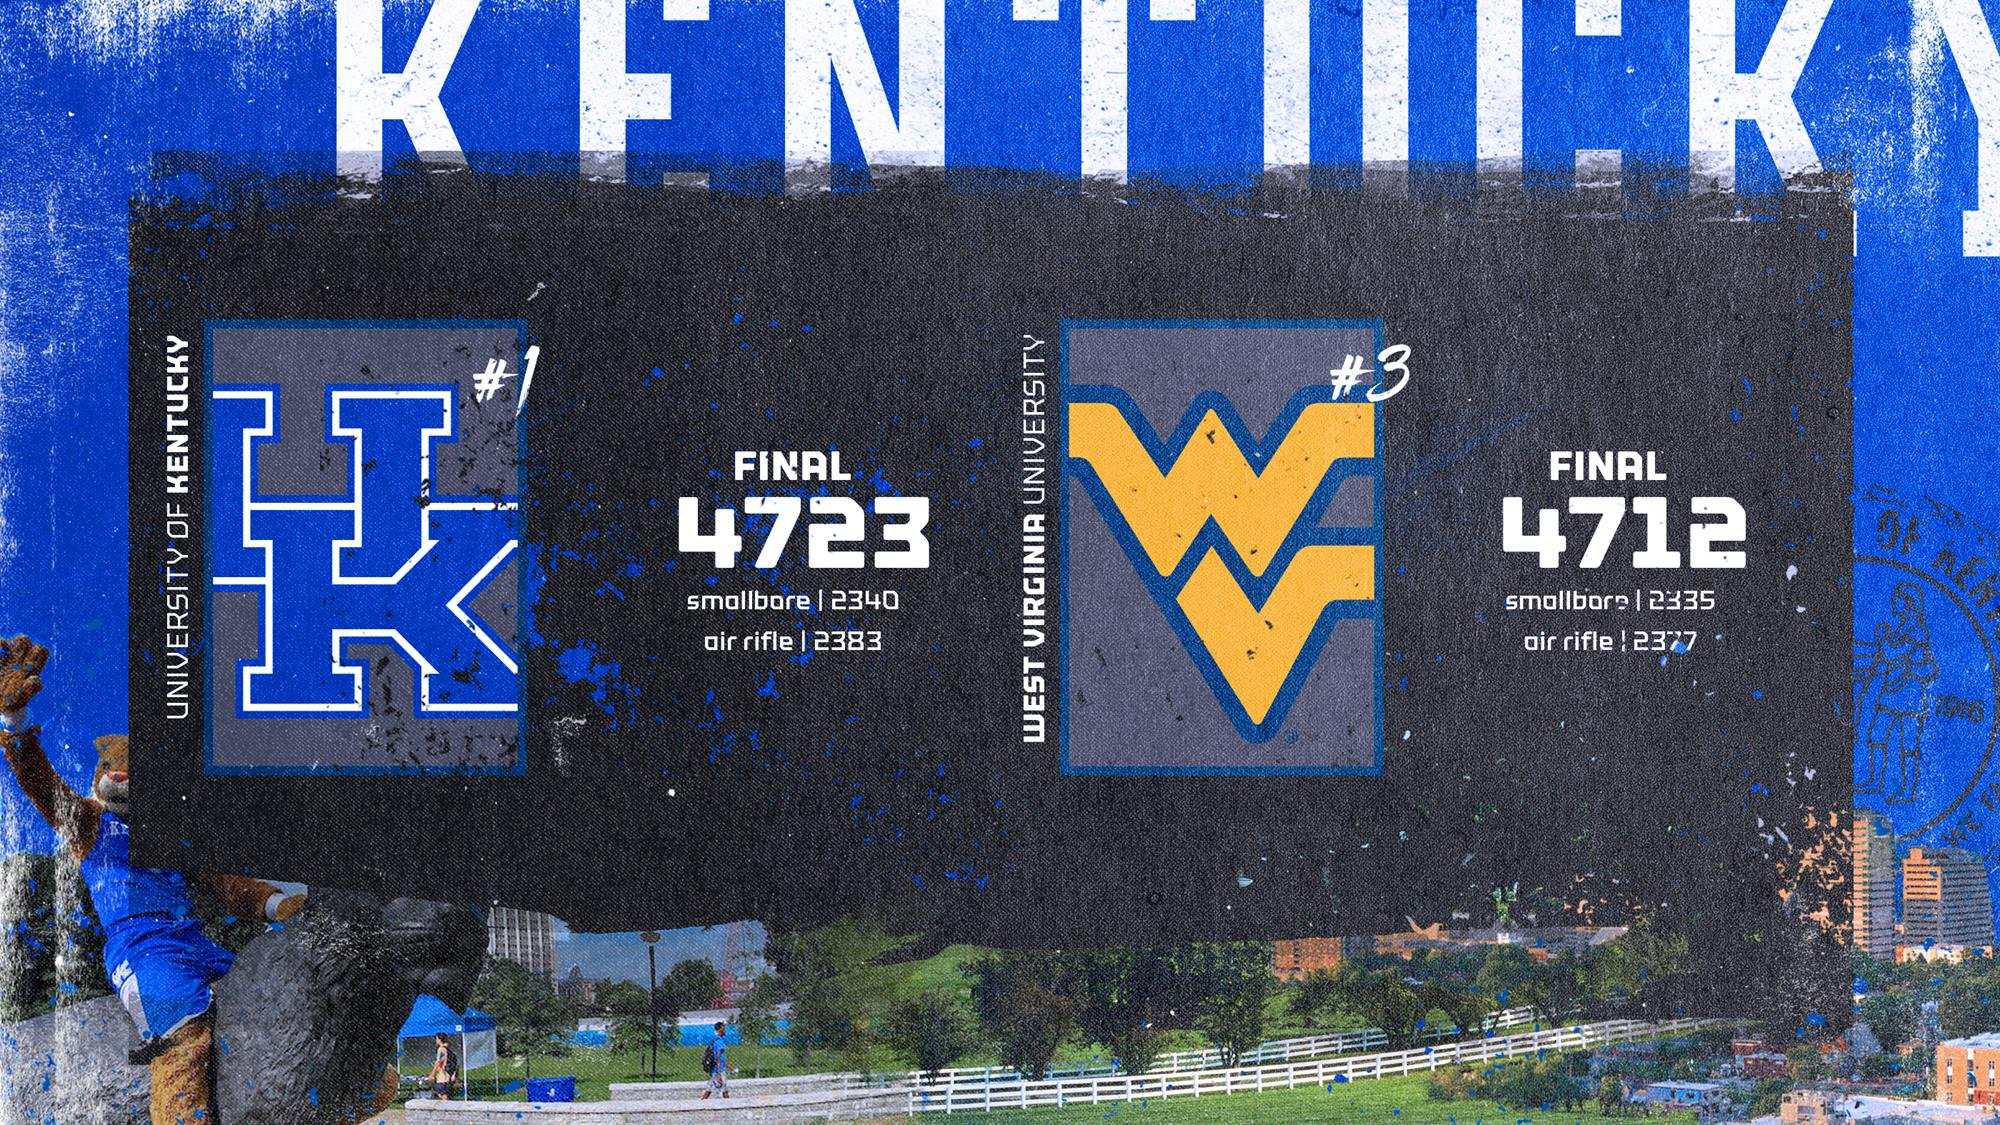 Best of '19-'20: No. 1 Rifle Wins at No. 3 West Virginia